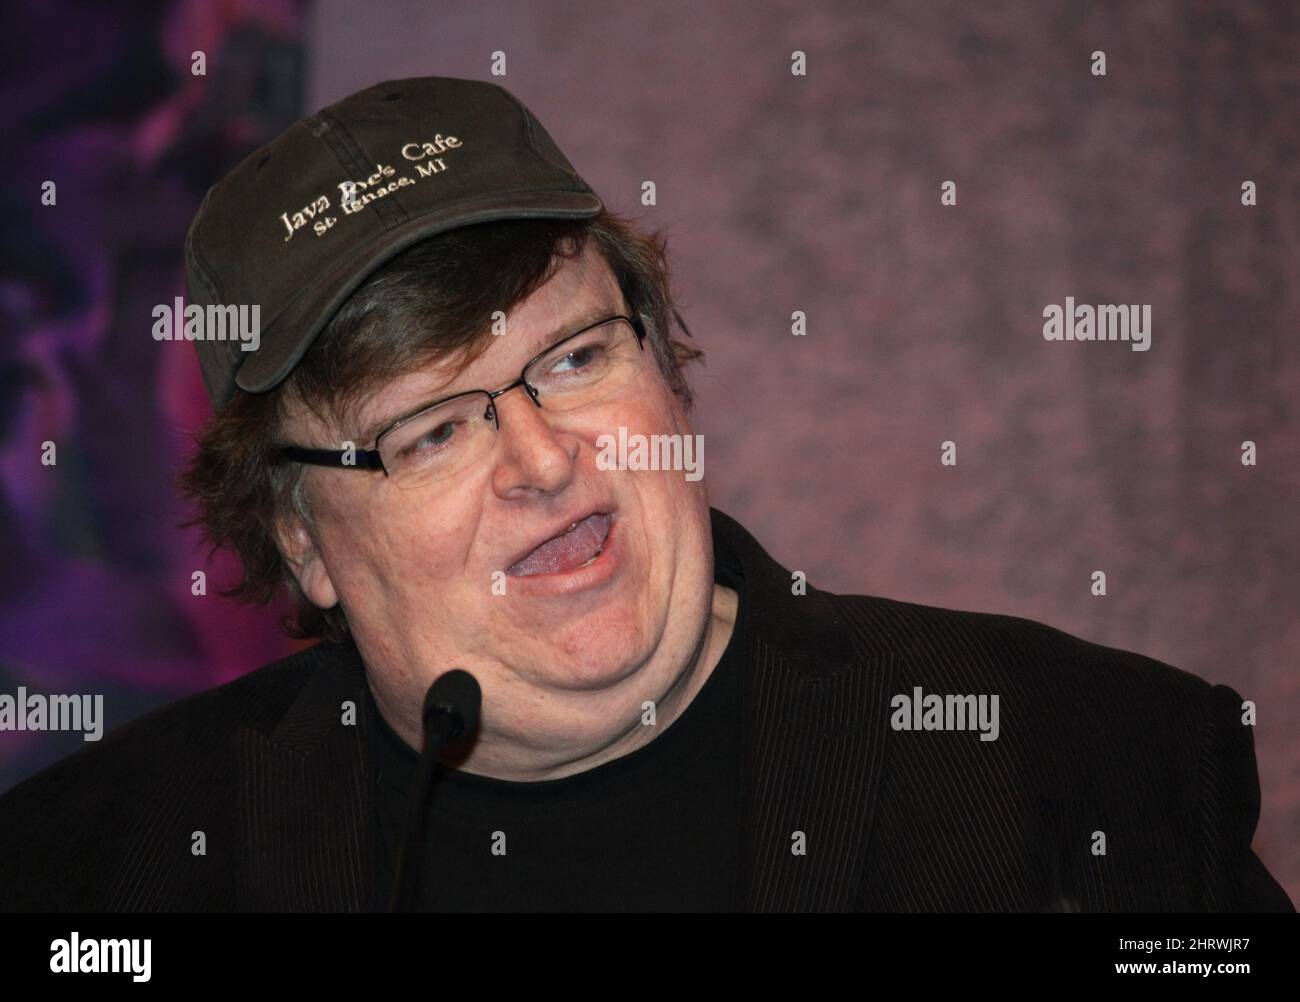 Documentary maker Michael Moore speaks at a health-care conference in Toronto on Tuesday, Nov. 17, 2009. (AP Photo/The Canadian Press, Colin Perkel) Stock Photo